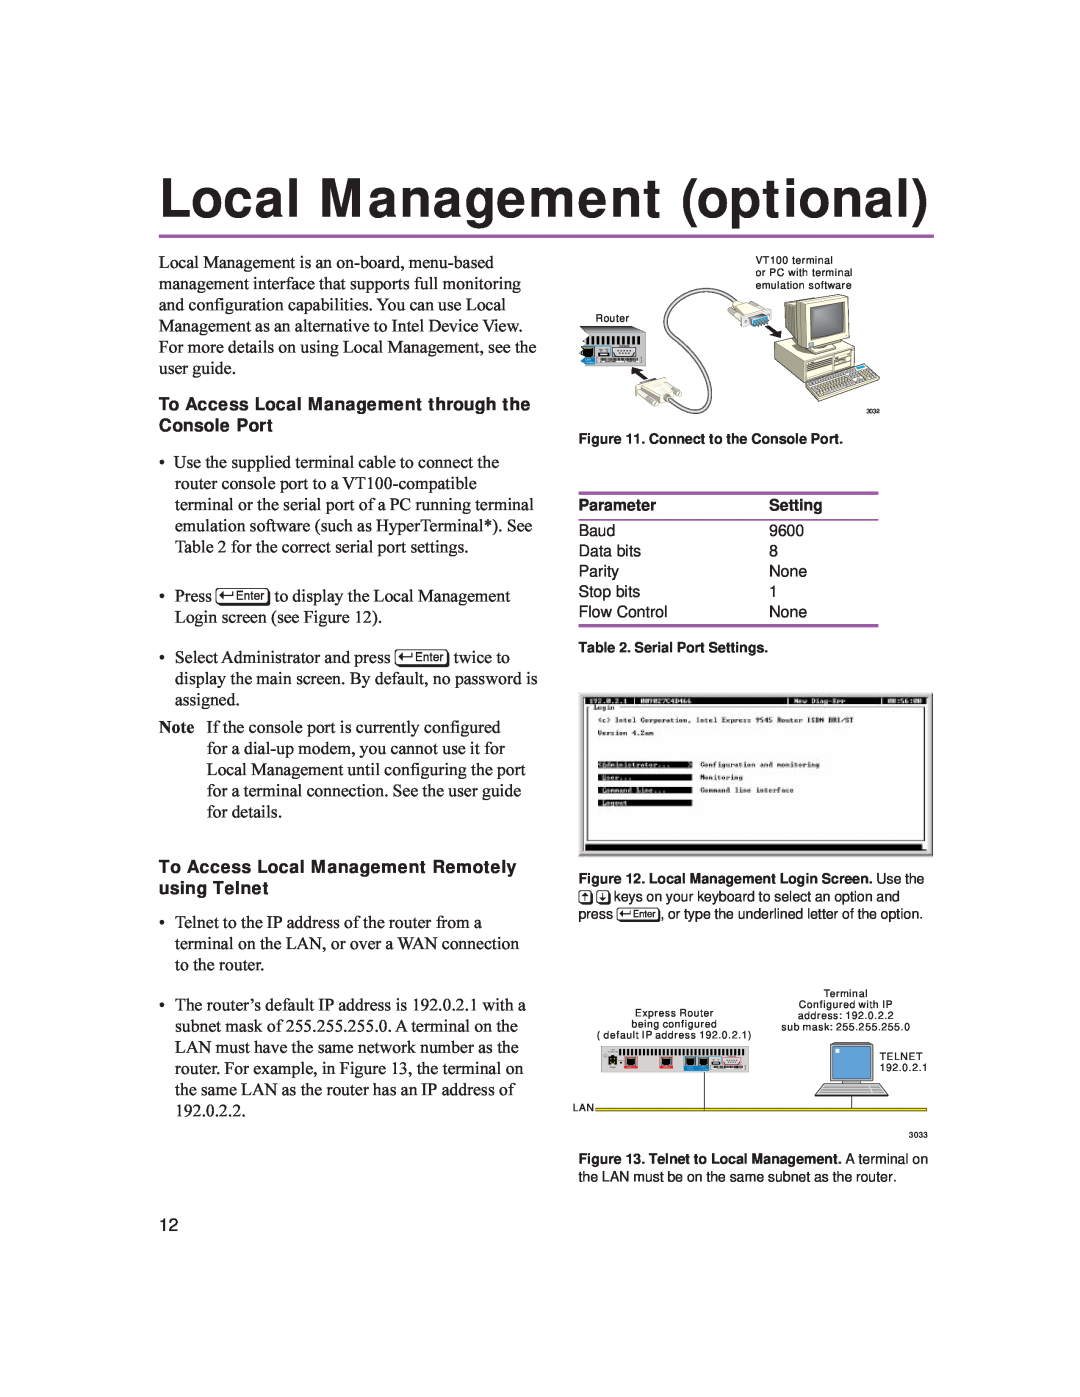 Intel 9545 quick start Local Management optional, To Access Local Management Remotely using Telnet 